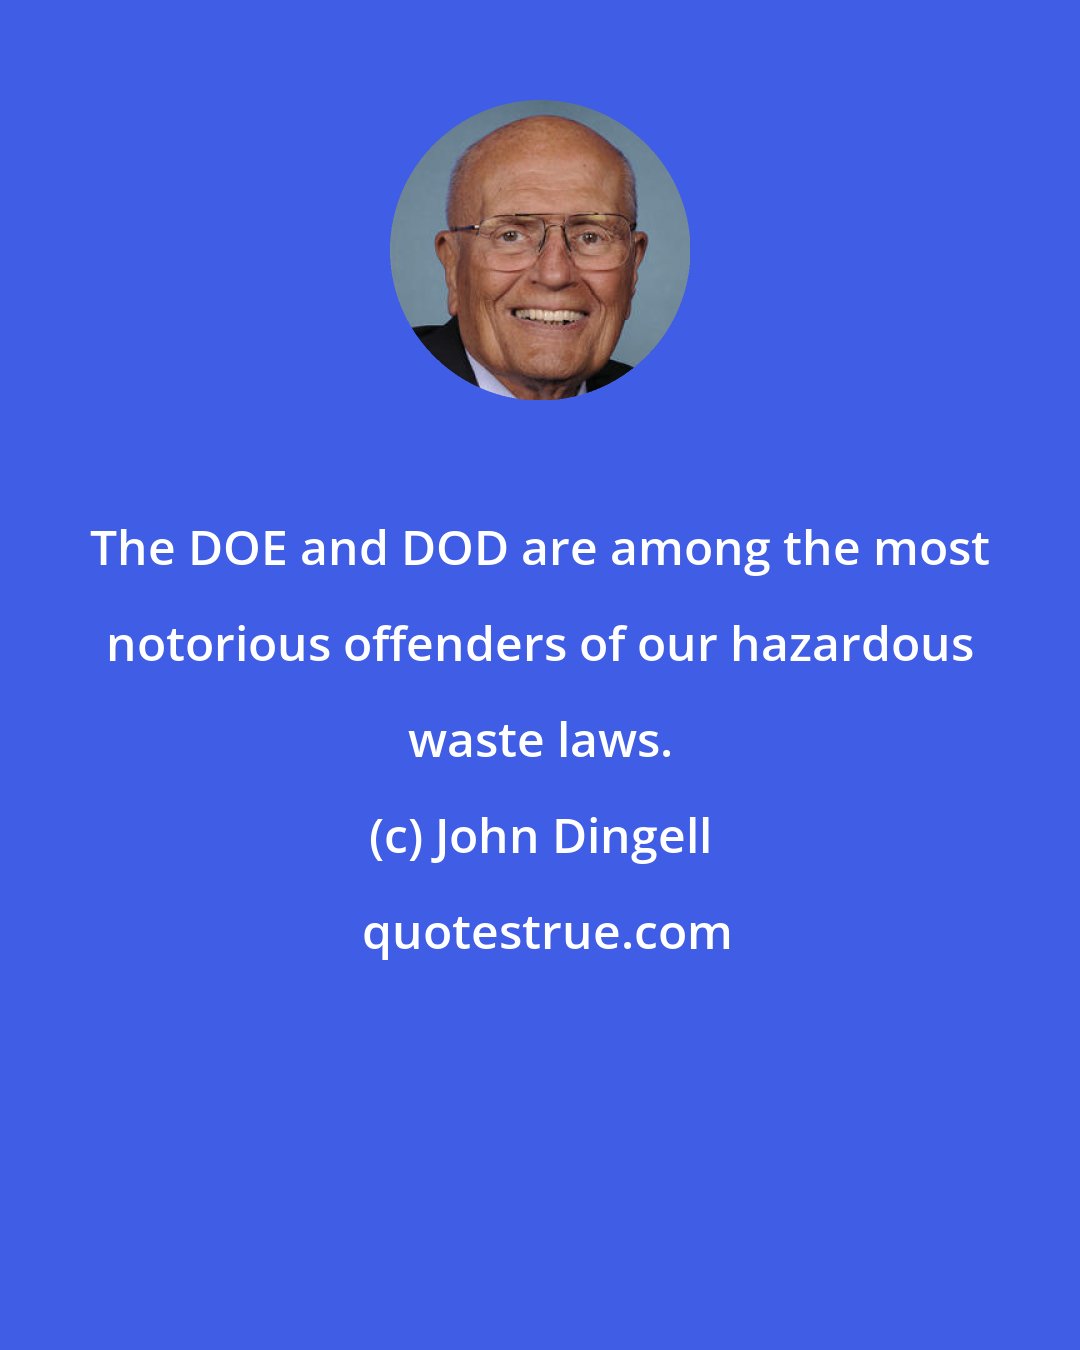 John Dingell: The DOE and DOD are among the most notorious offenders of our hazardous waste laws.